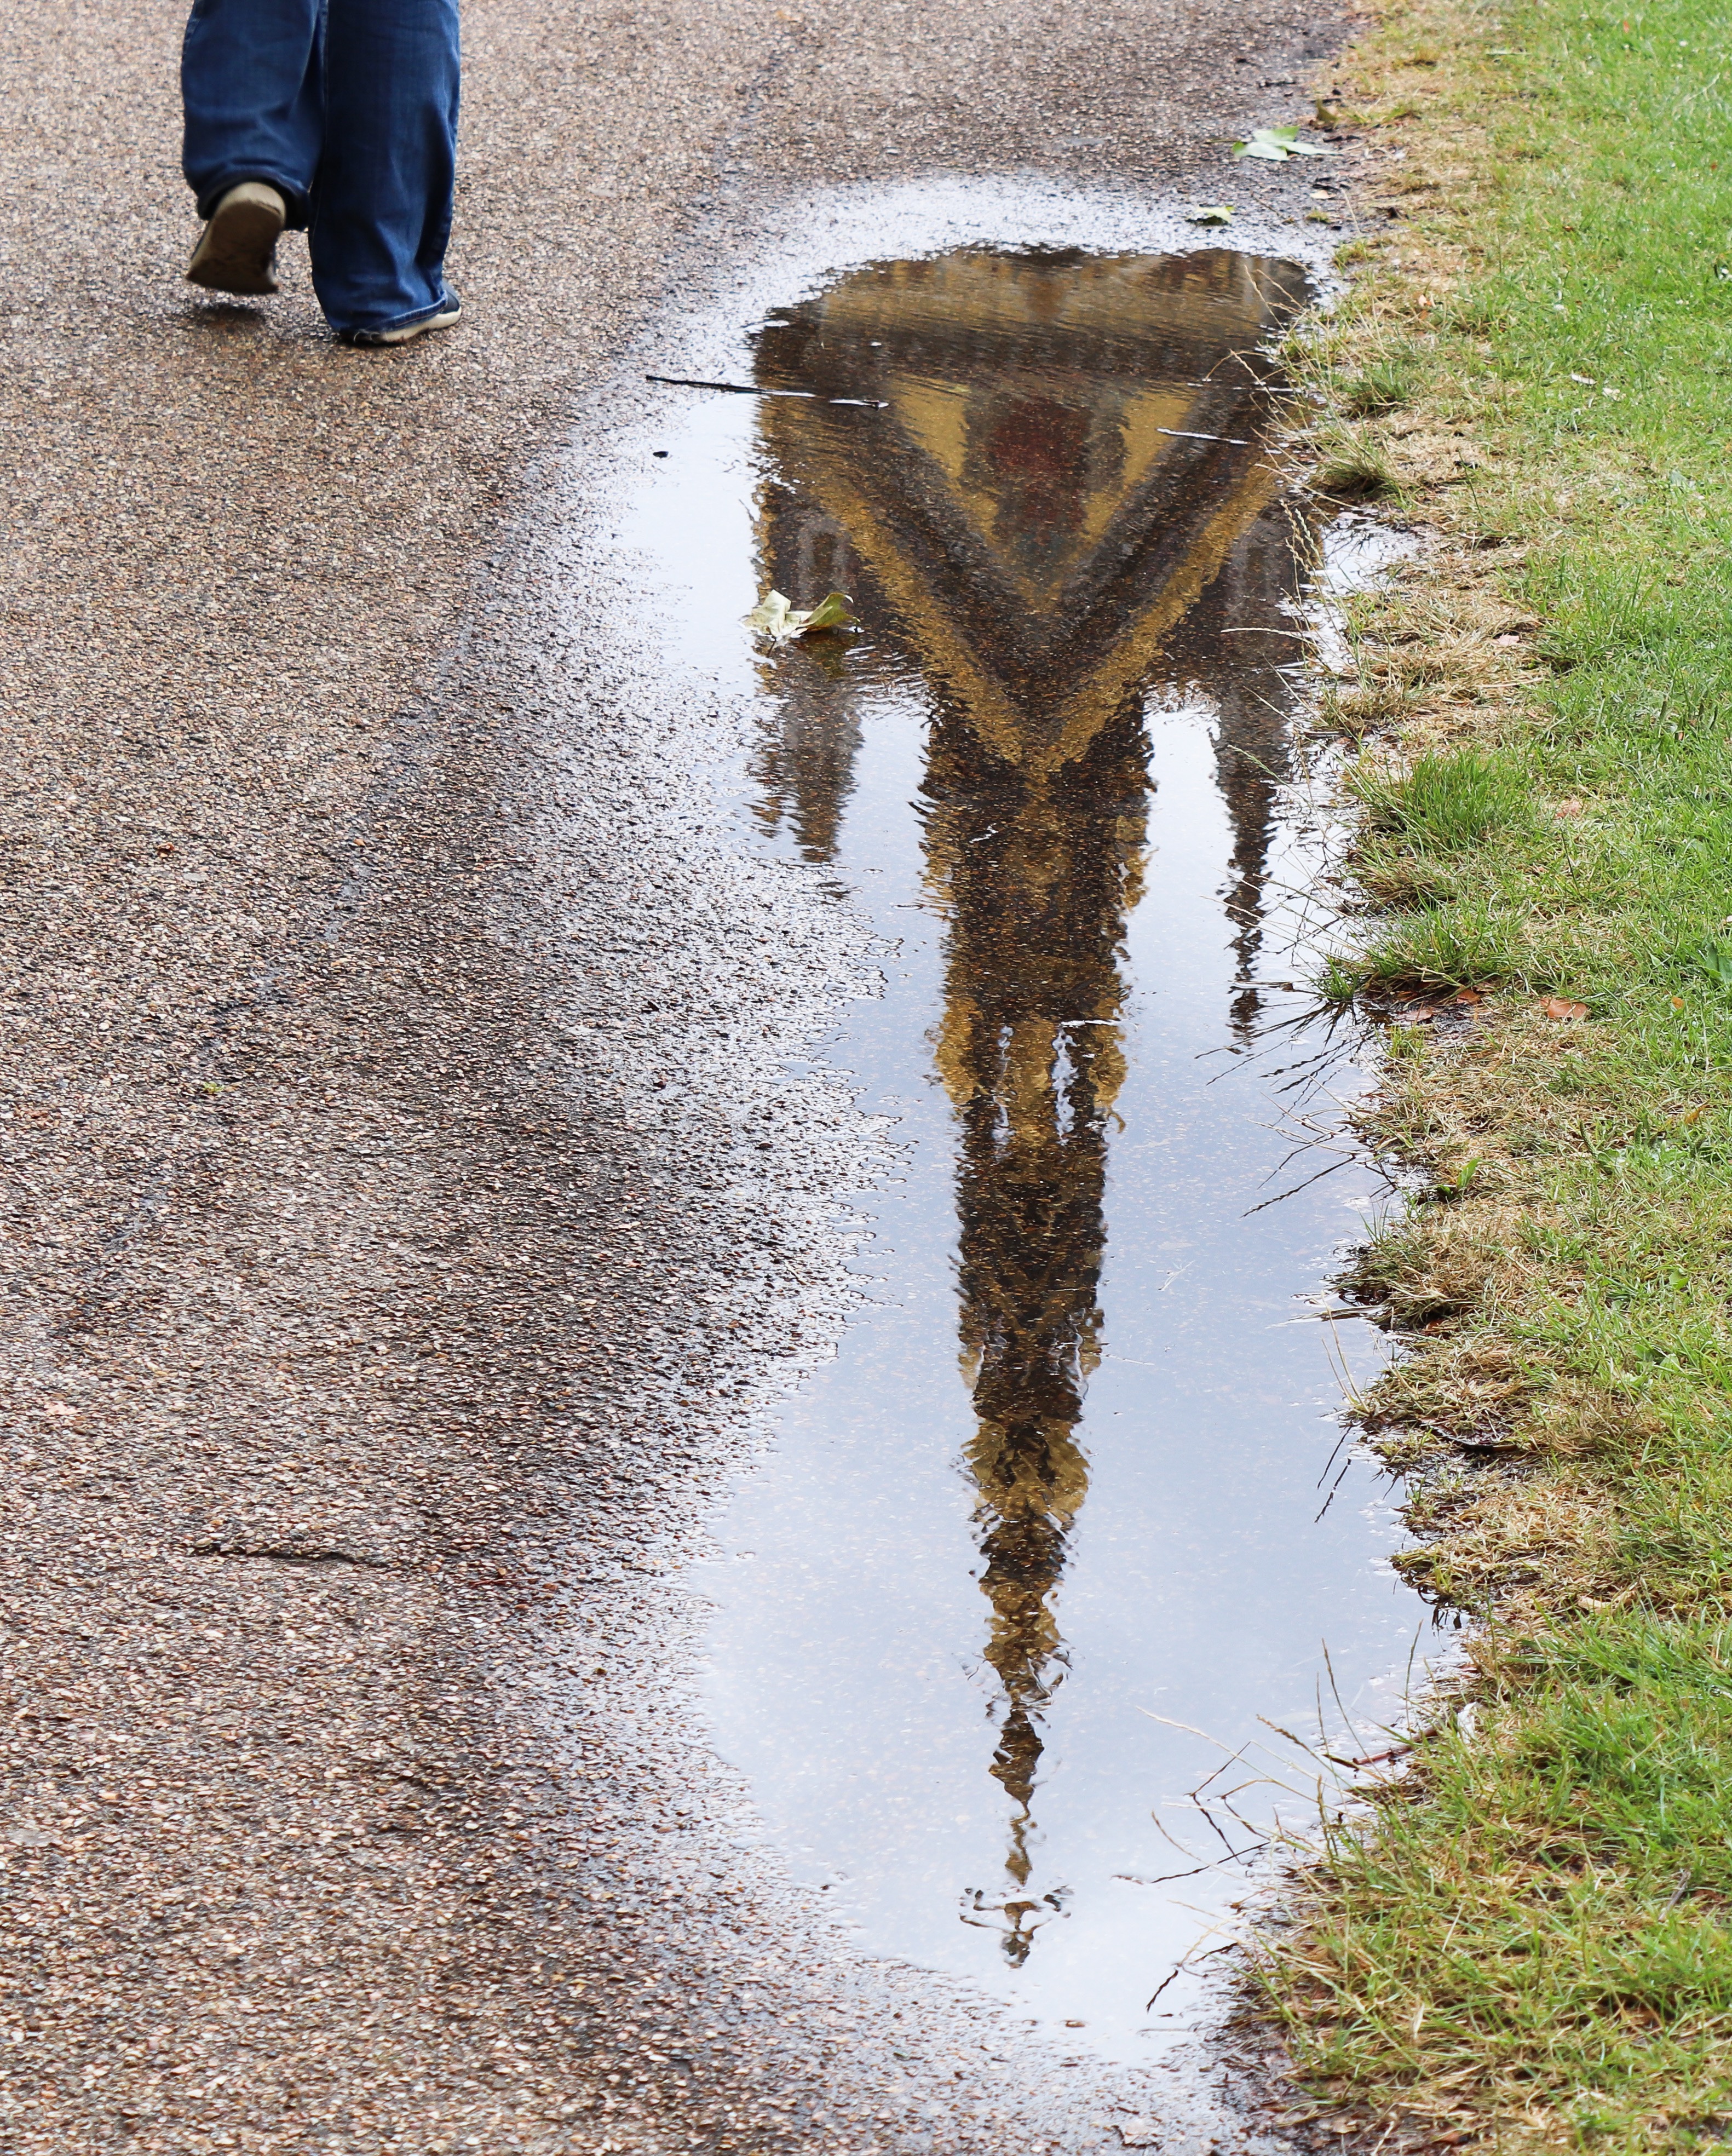 Prince Albert memorial reflected in a puddle